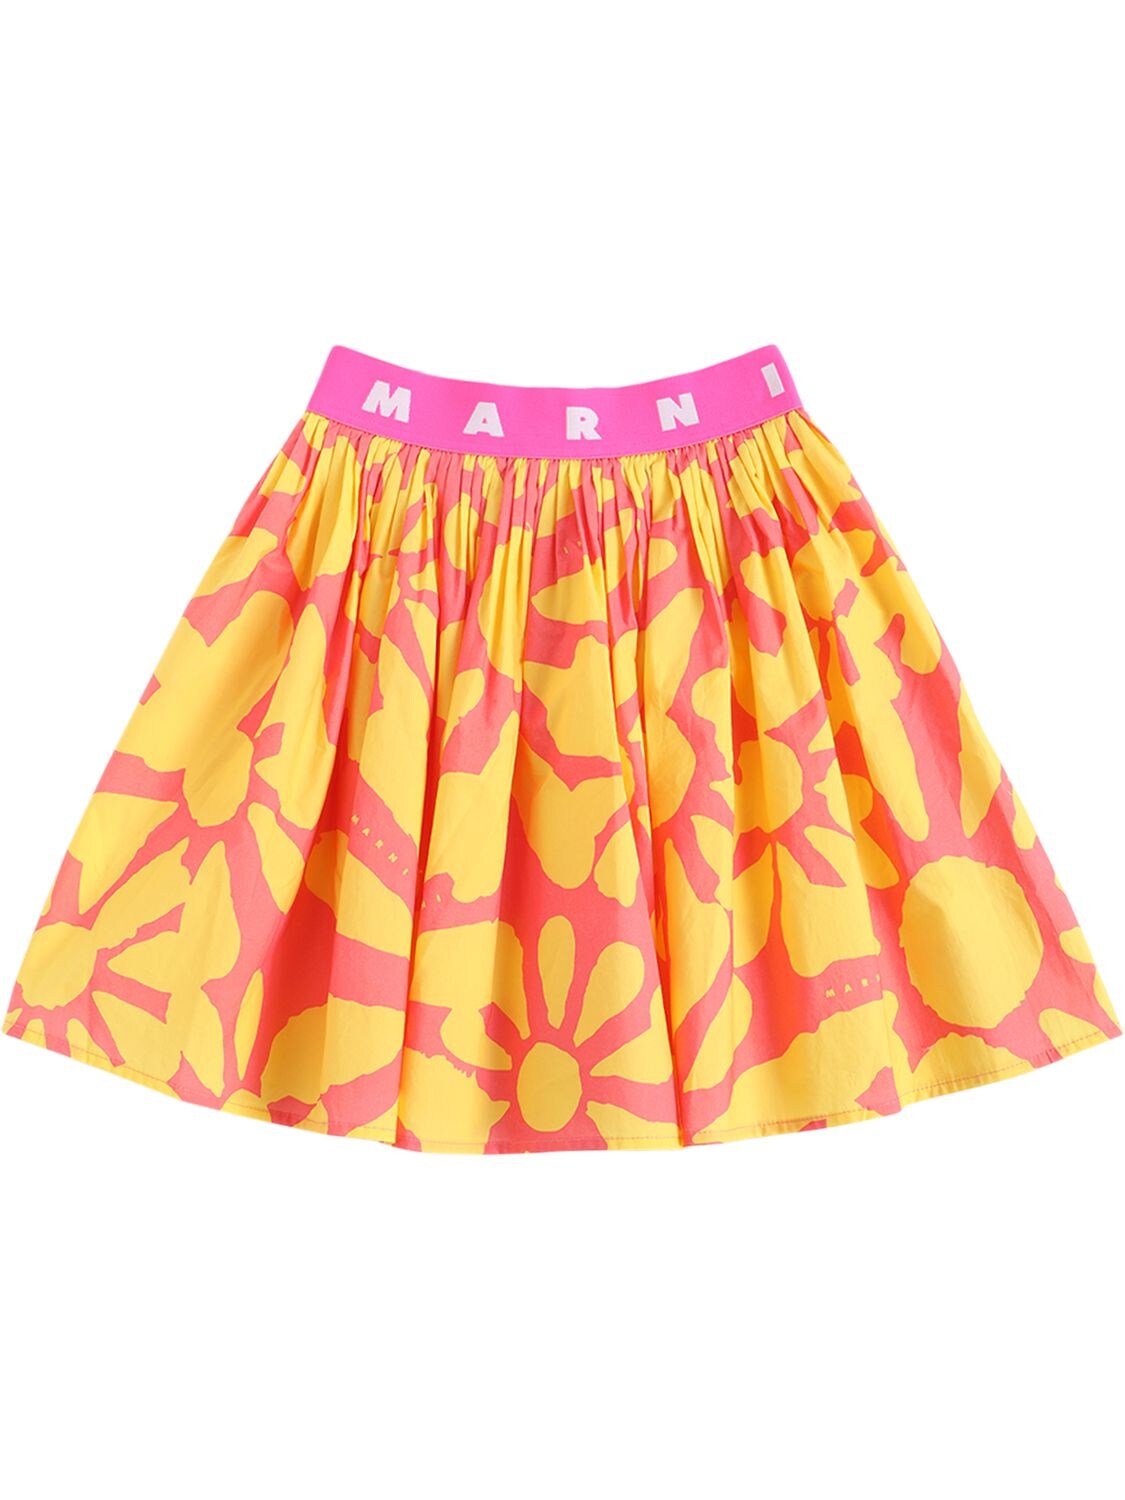 Marni Junior Kids' All Over Print Cotton Skirt W/ Logo In Yellow,pink